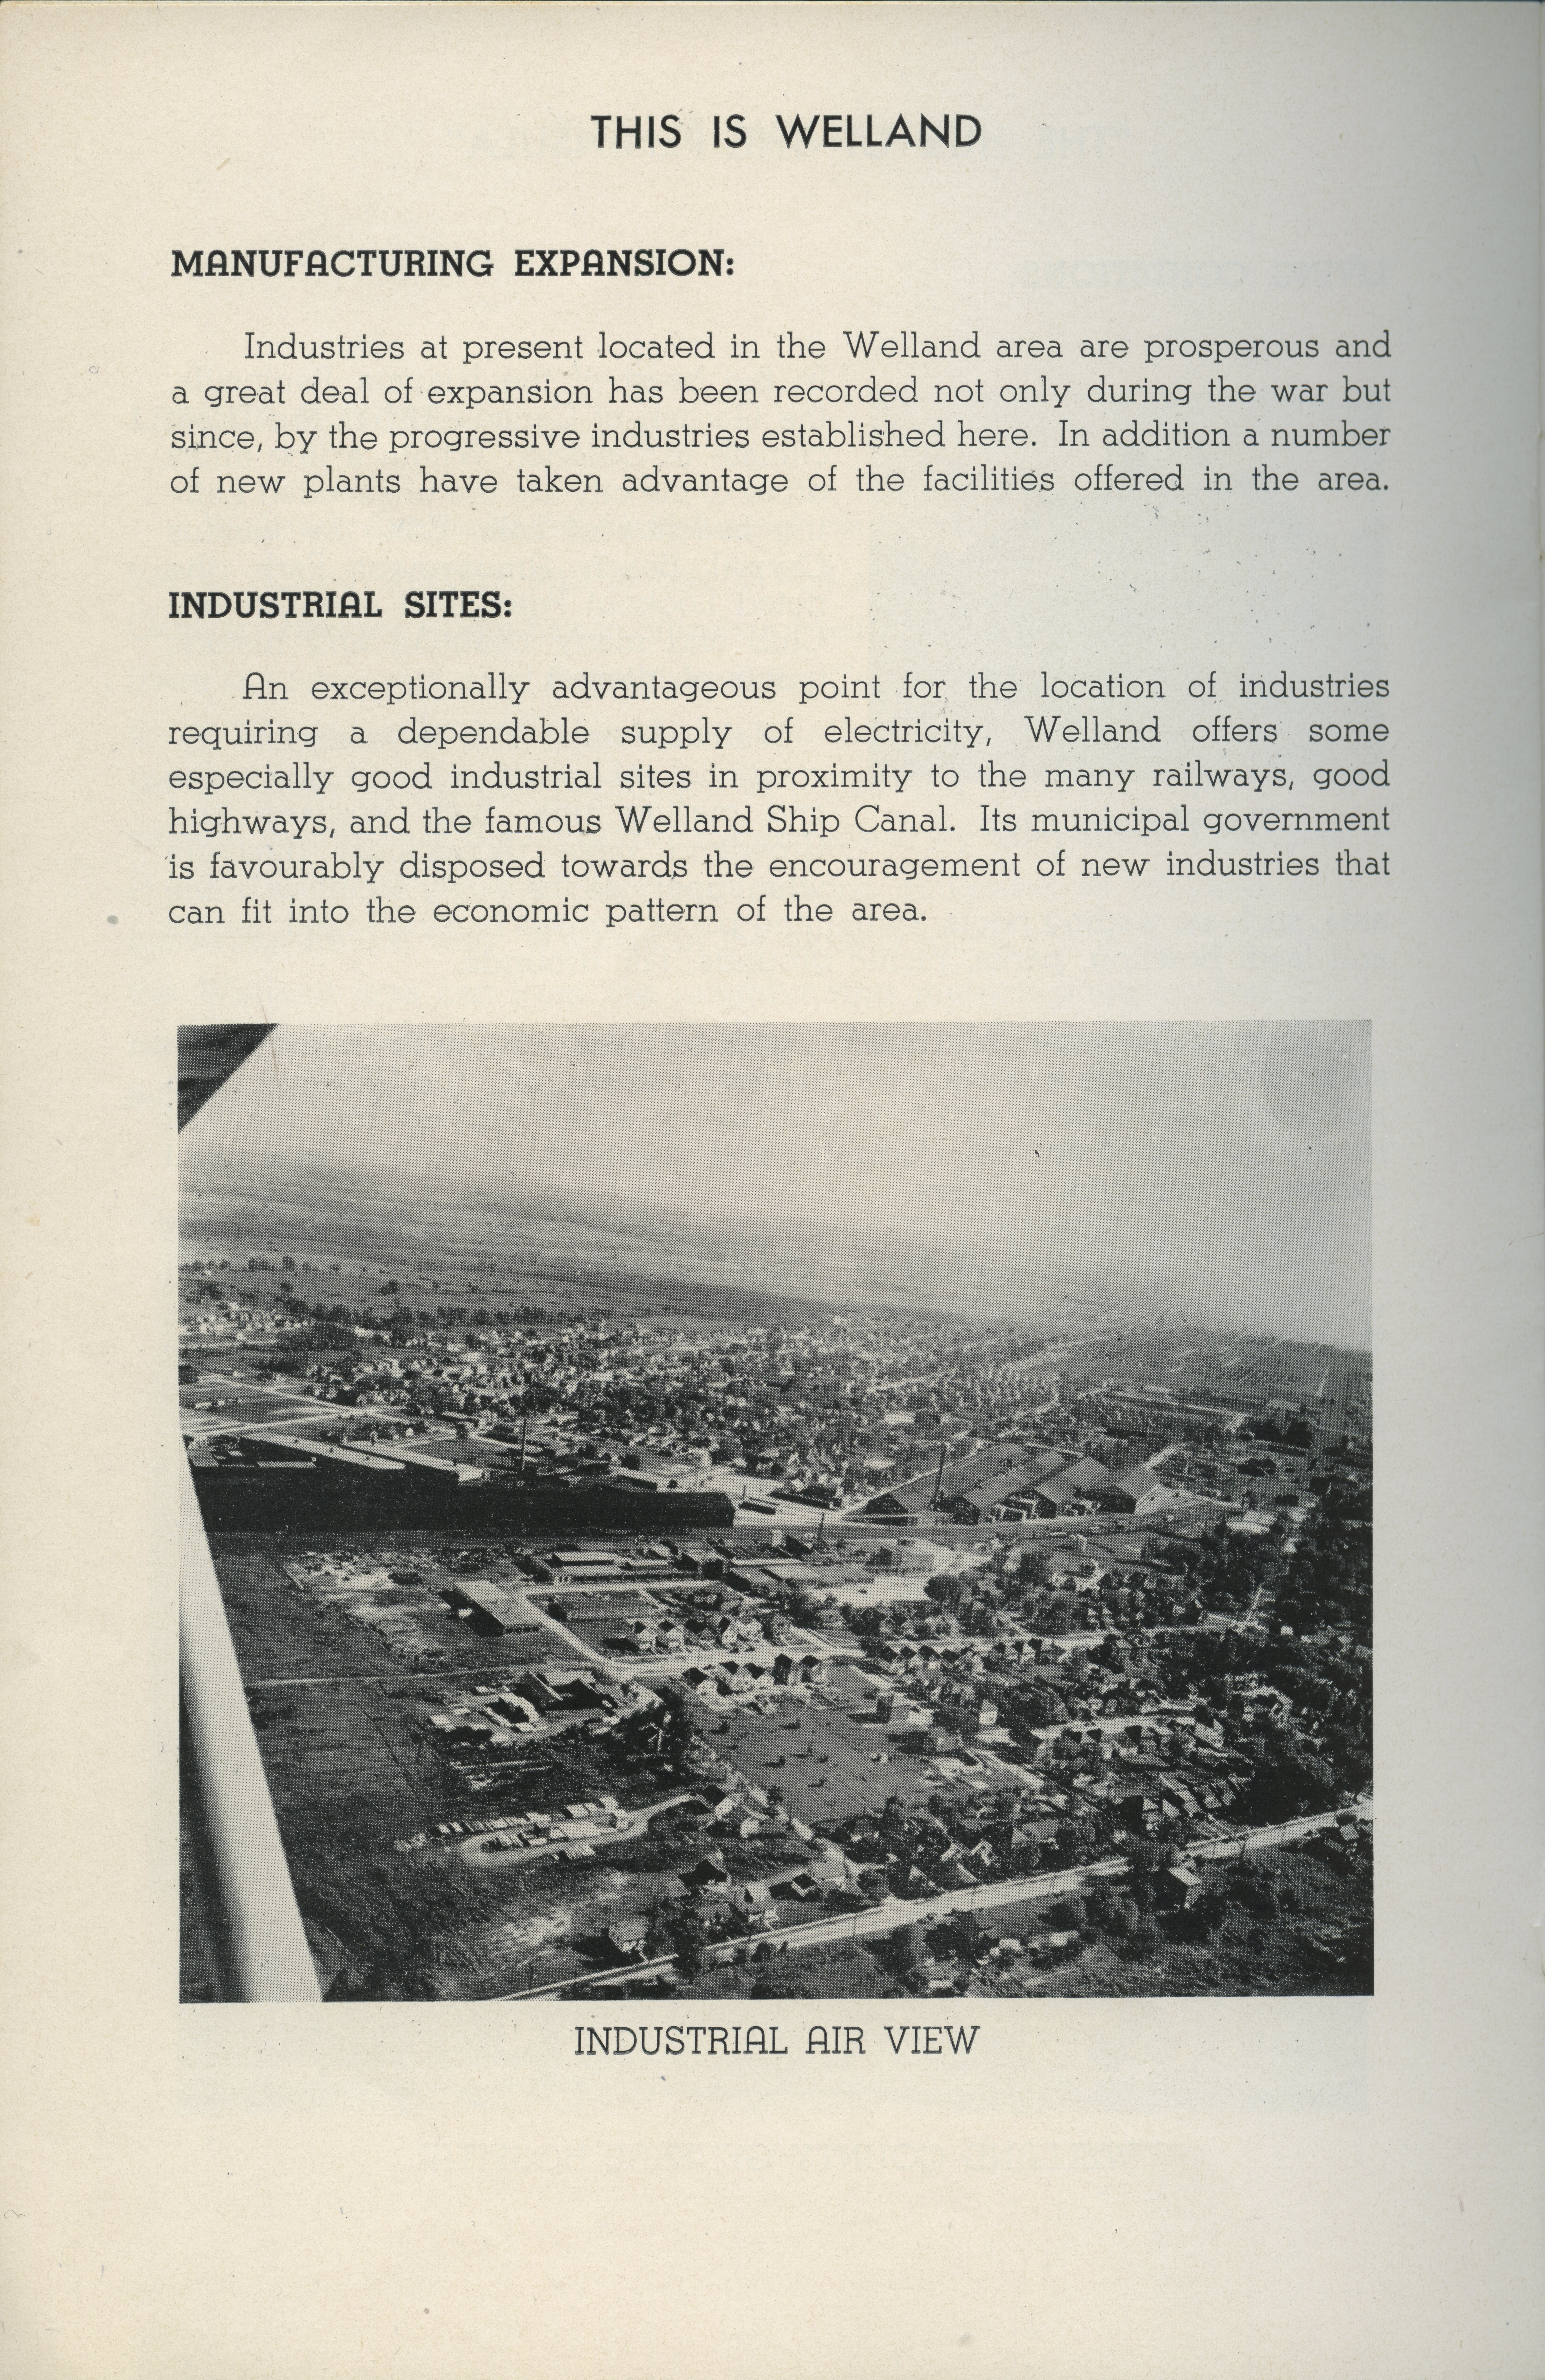 A page of a brochure, with text and a black and white aerial photograph.